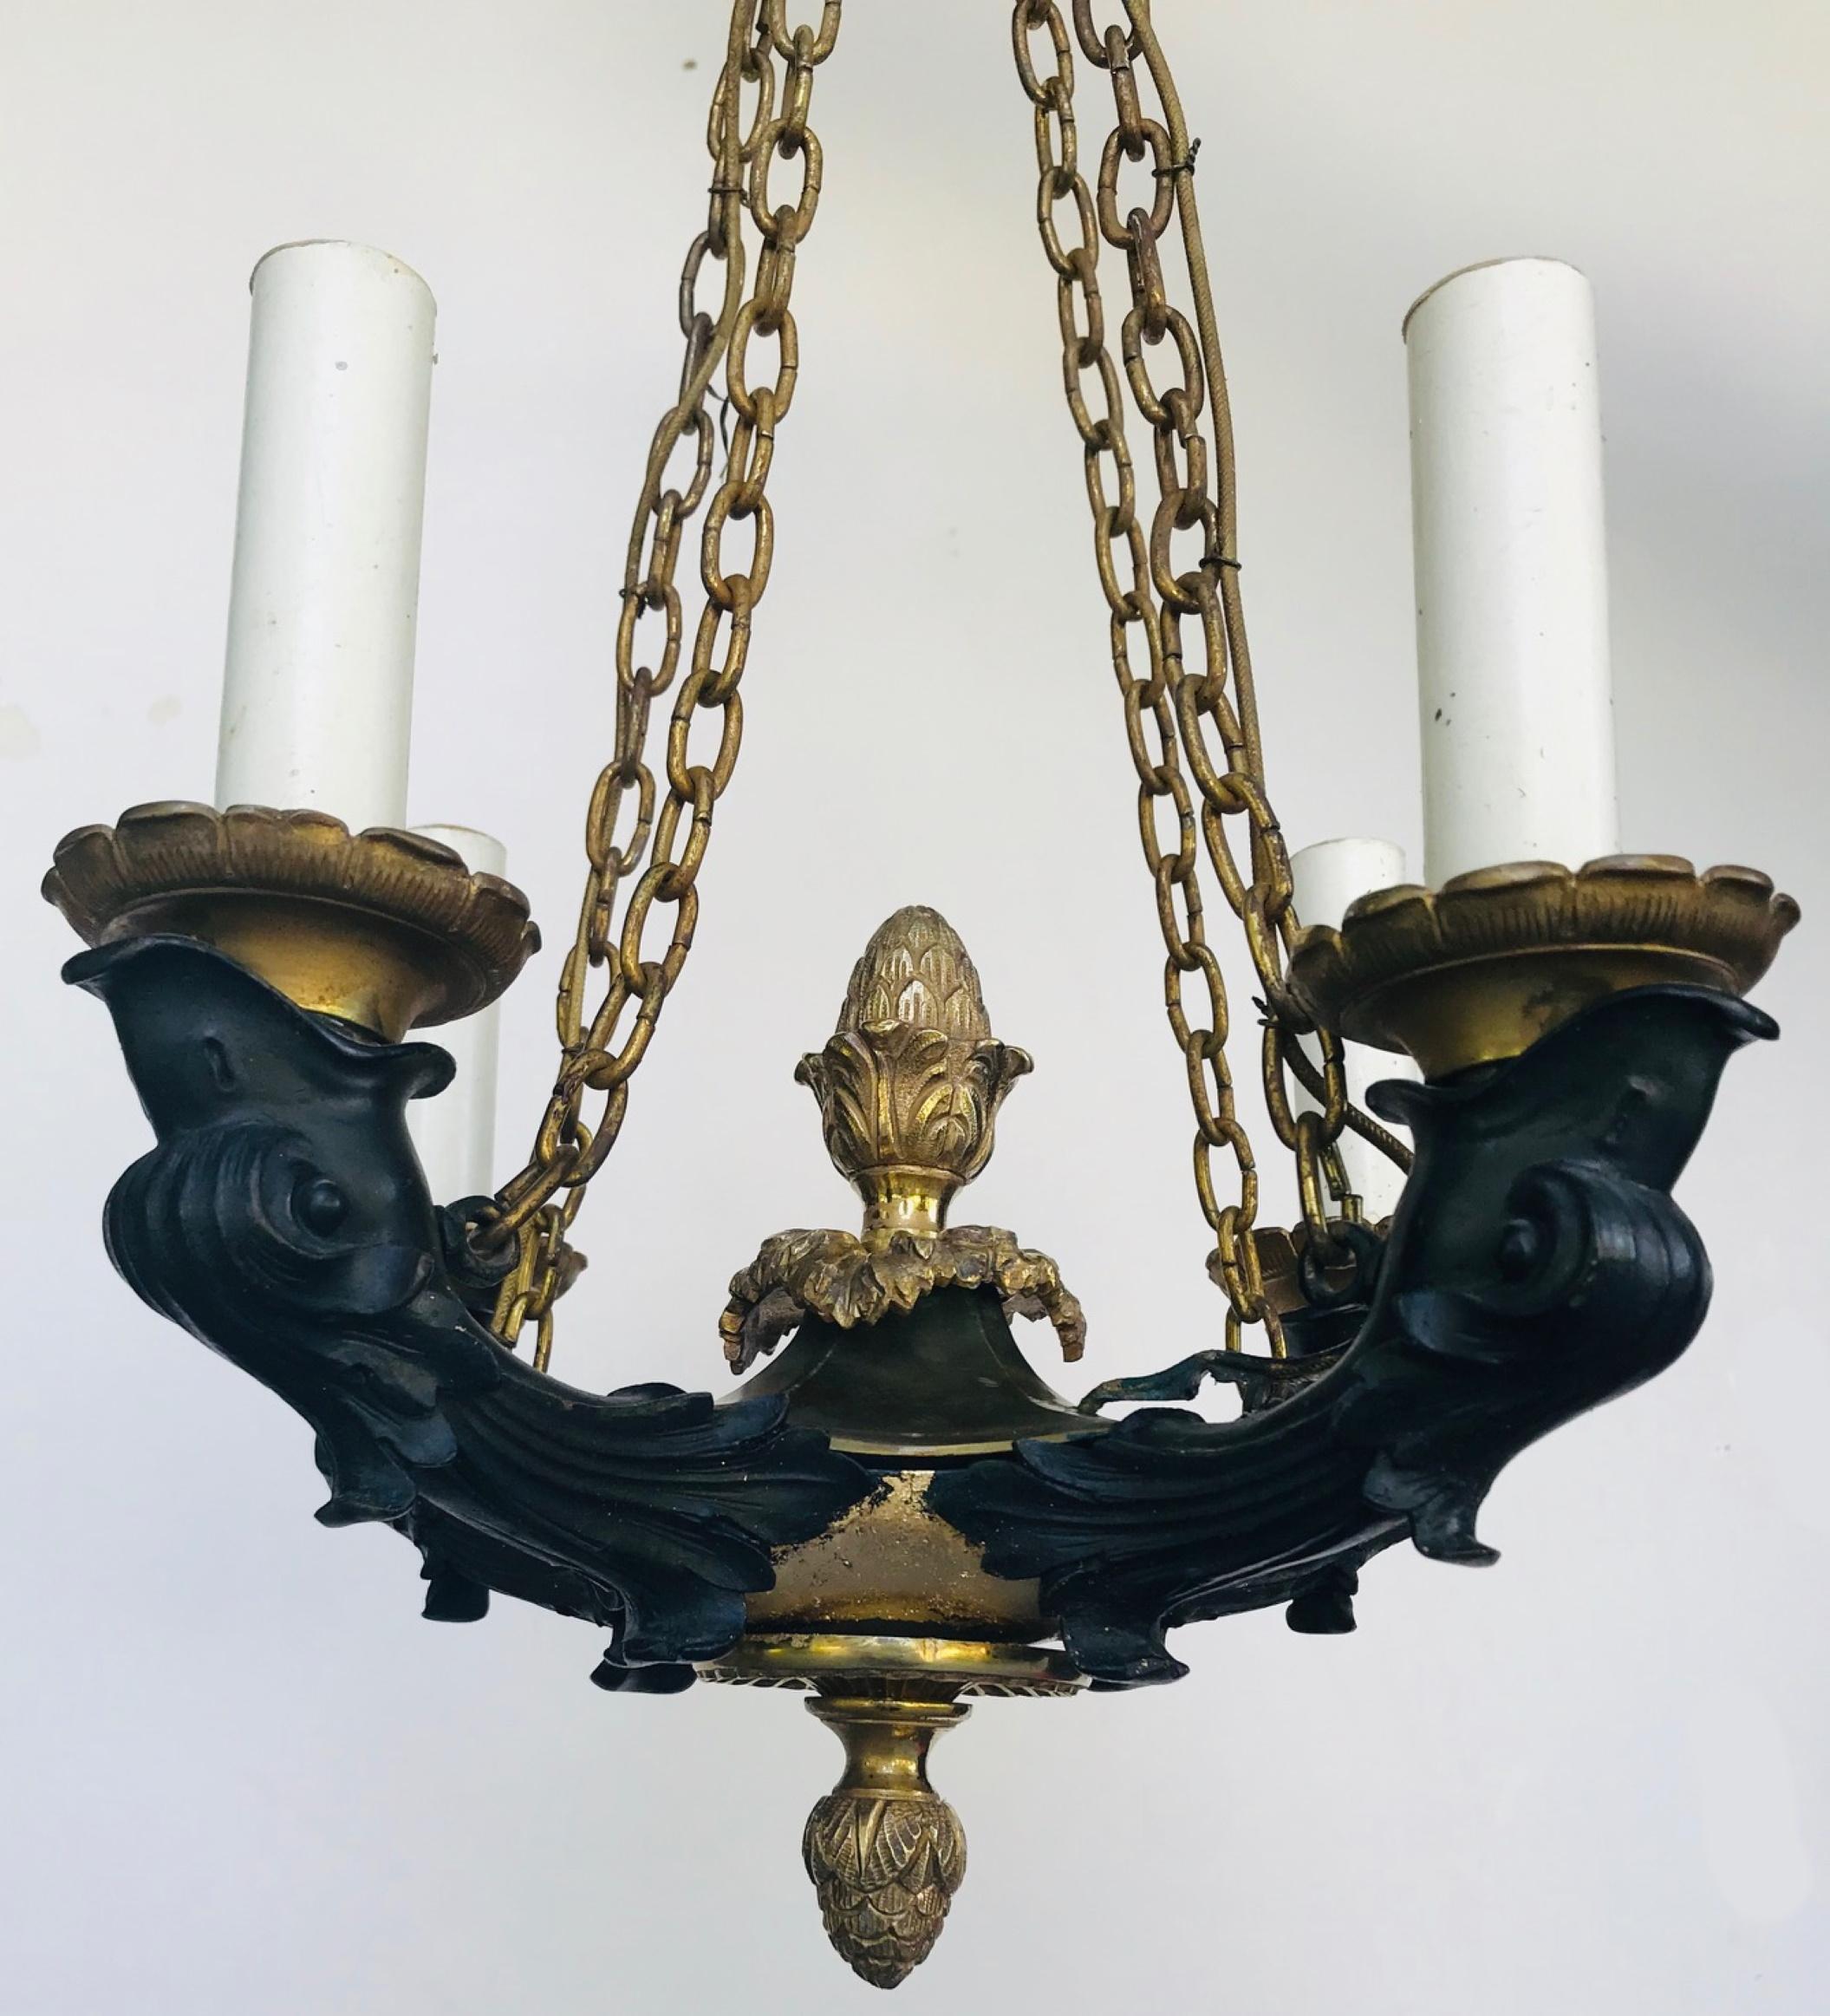 Cast 19th Century French Empire Small Patinated Bronze Chandelier